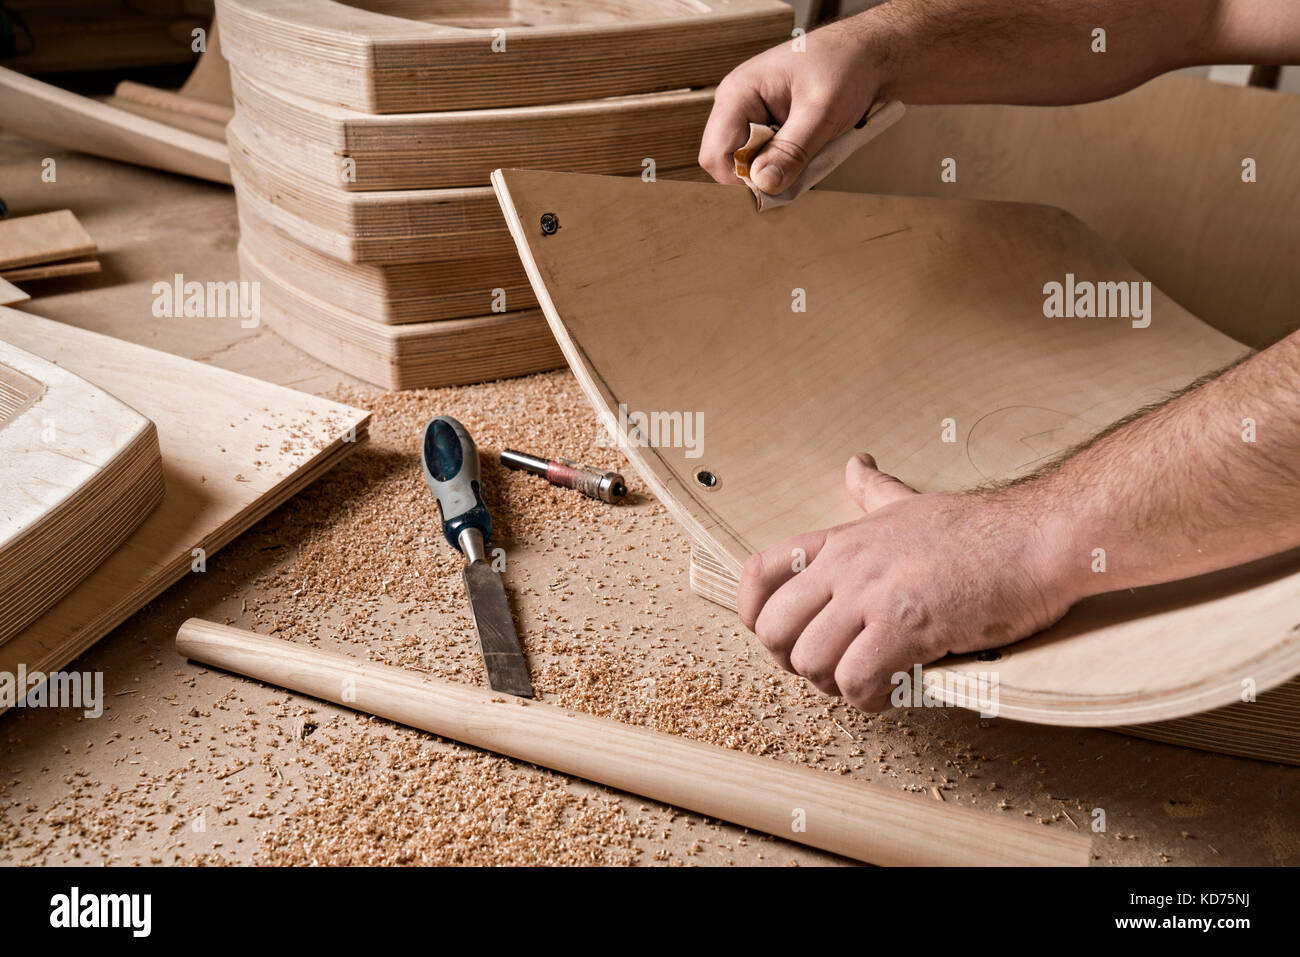 Set of carpenters tool on the wood and shavings Stock Photo